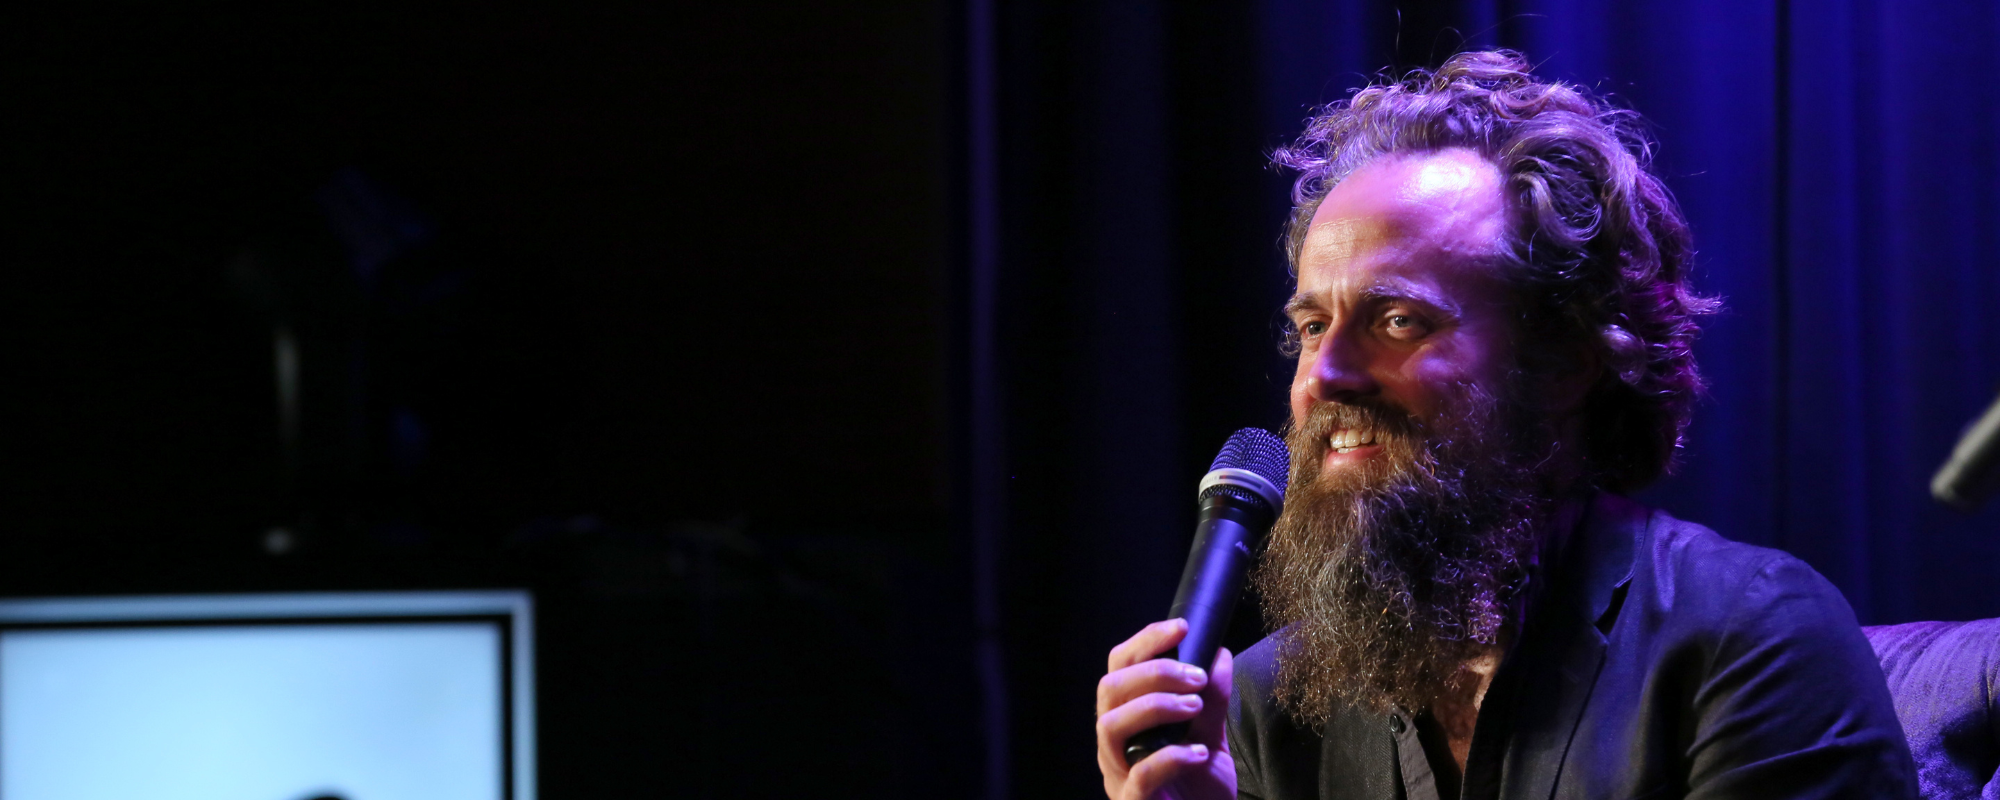 The Meaning Behind Iron and Wine’s Struggle Over Political Confusion, “Flightless Bird, American Mouth”